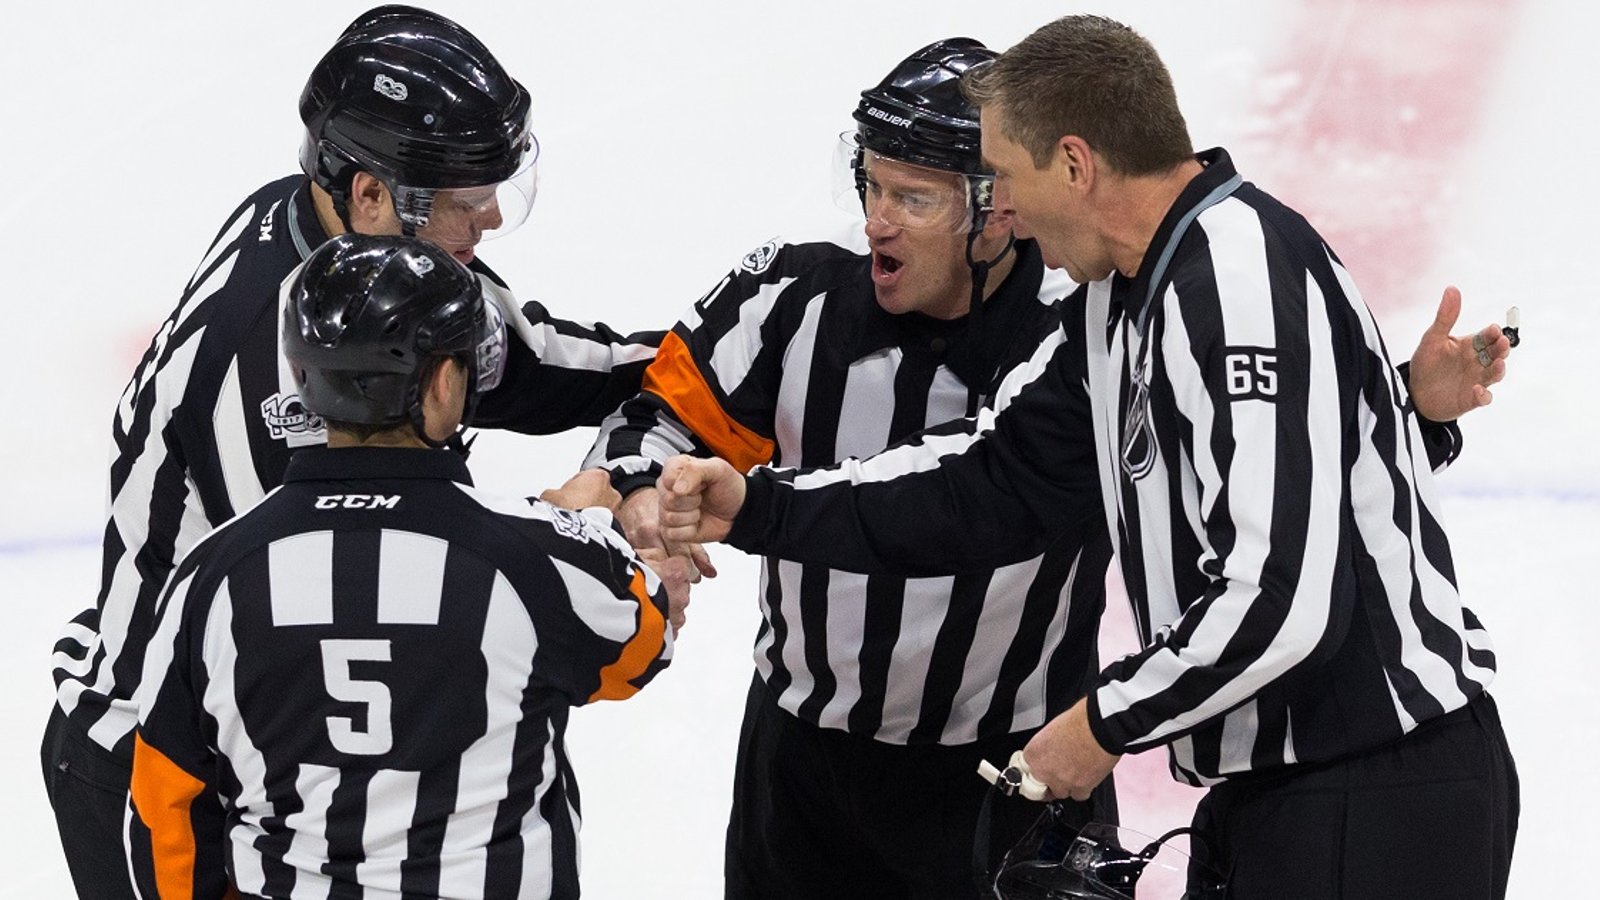 Major officiating screw up in the NHL on Superbowl Sunday.